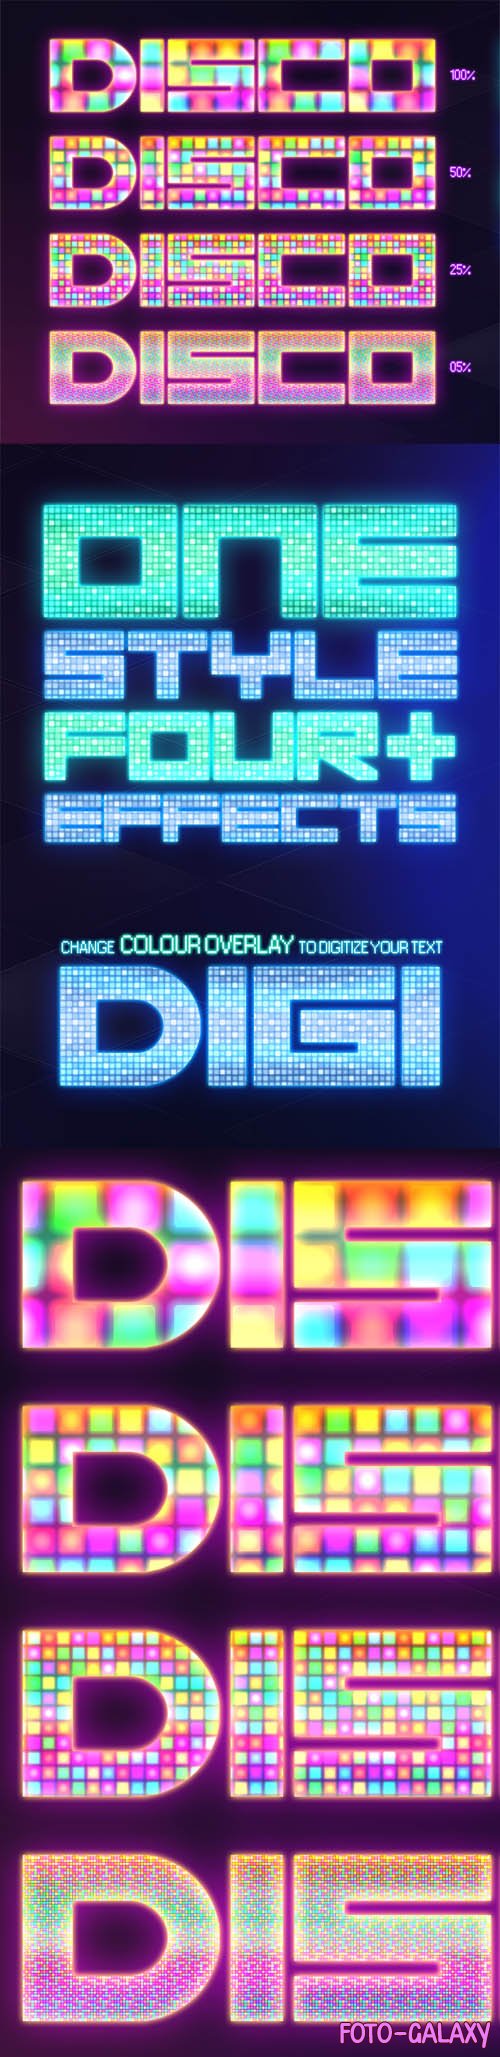 Disco Photoshop Styles Collection